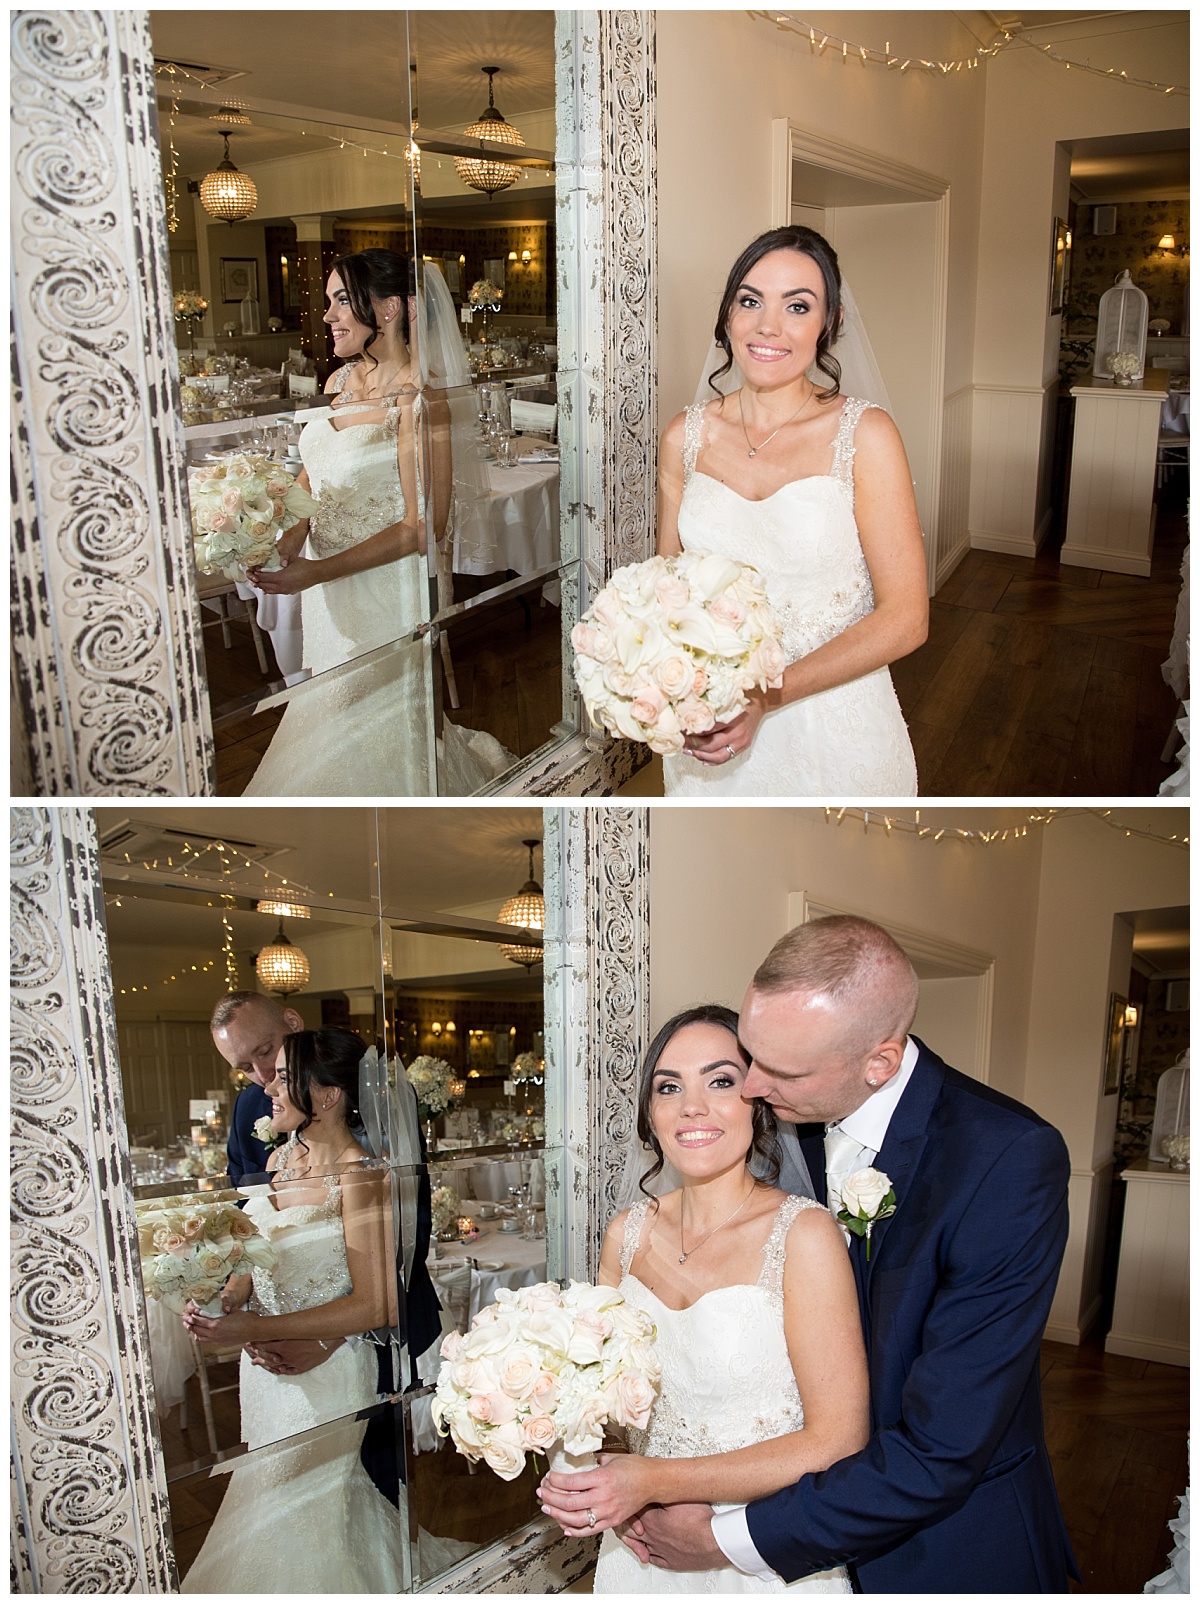 Wedding Photography Manchester - Victoria and Phillips Shireburn Arms wedding 65